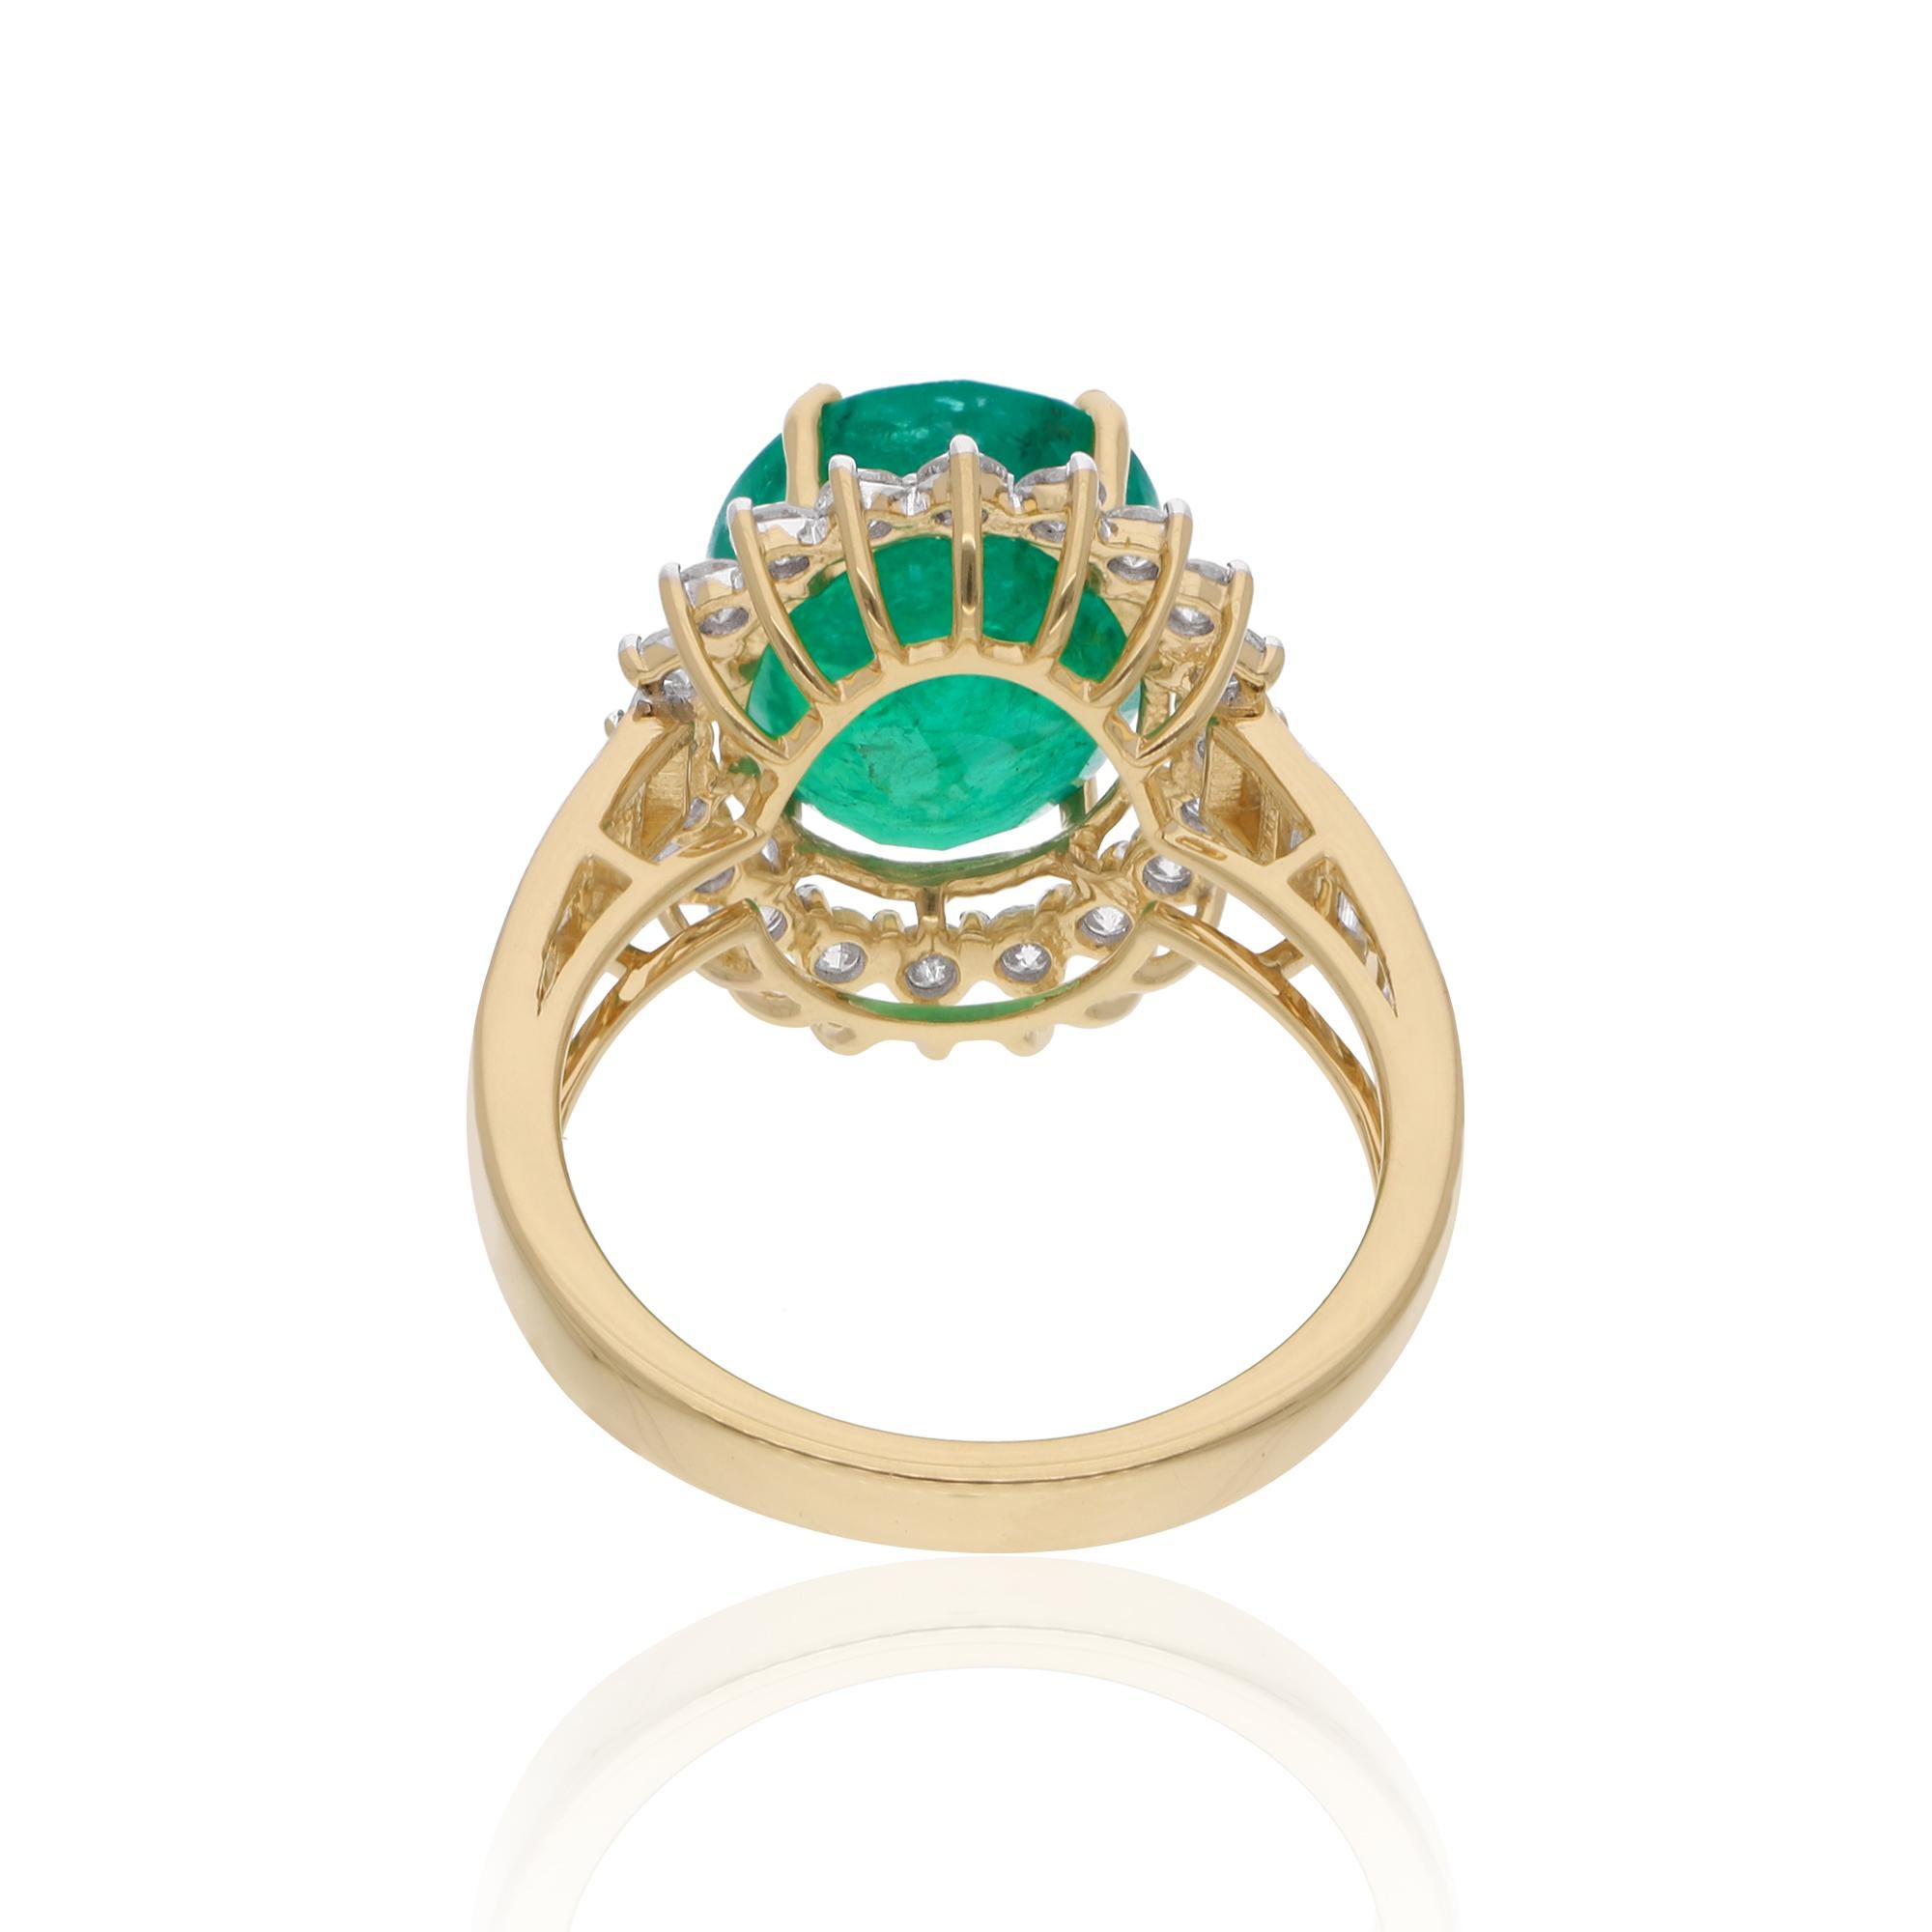 For Sale:  Real Oval Zambian Emerald Gemstone Cocktail Ring Diamond 18k Yellow Gold Jewelry 3